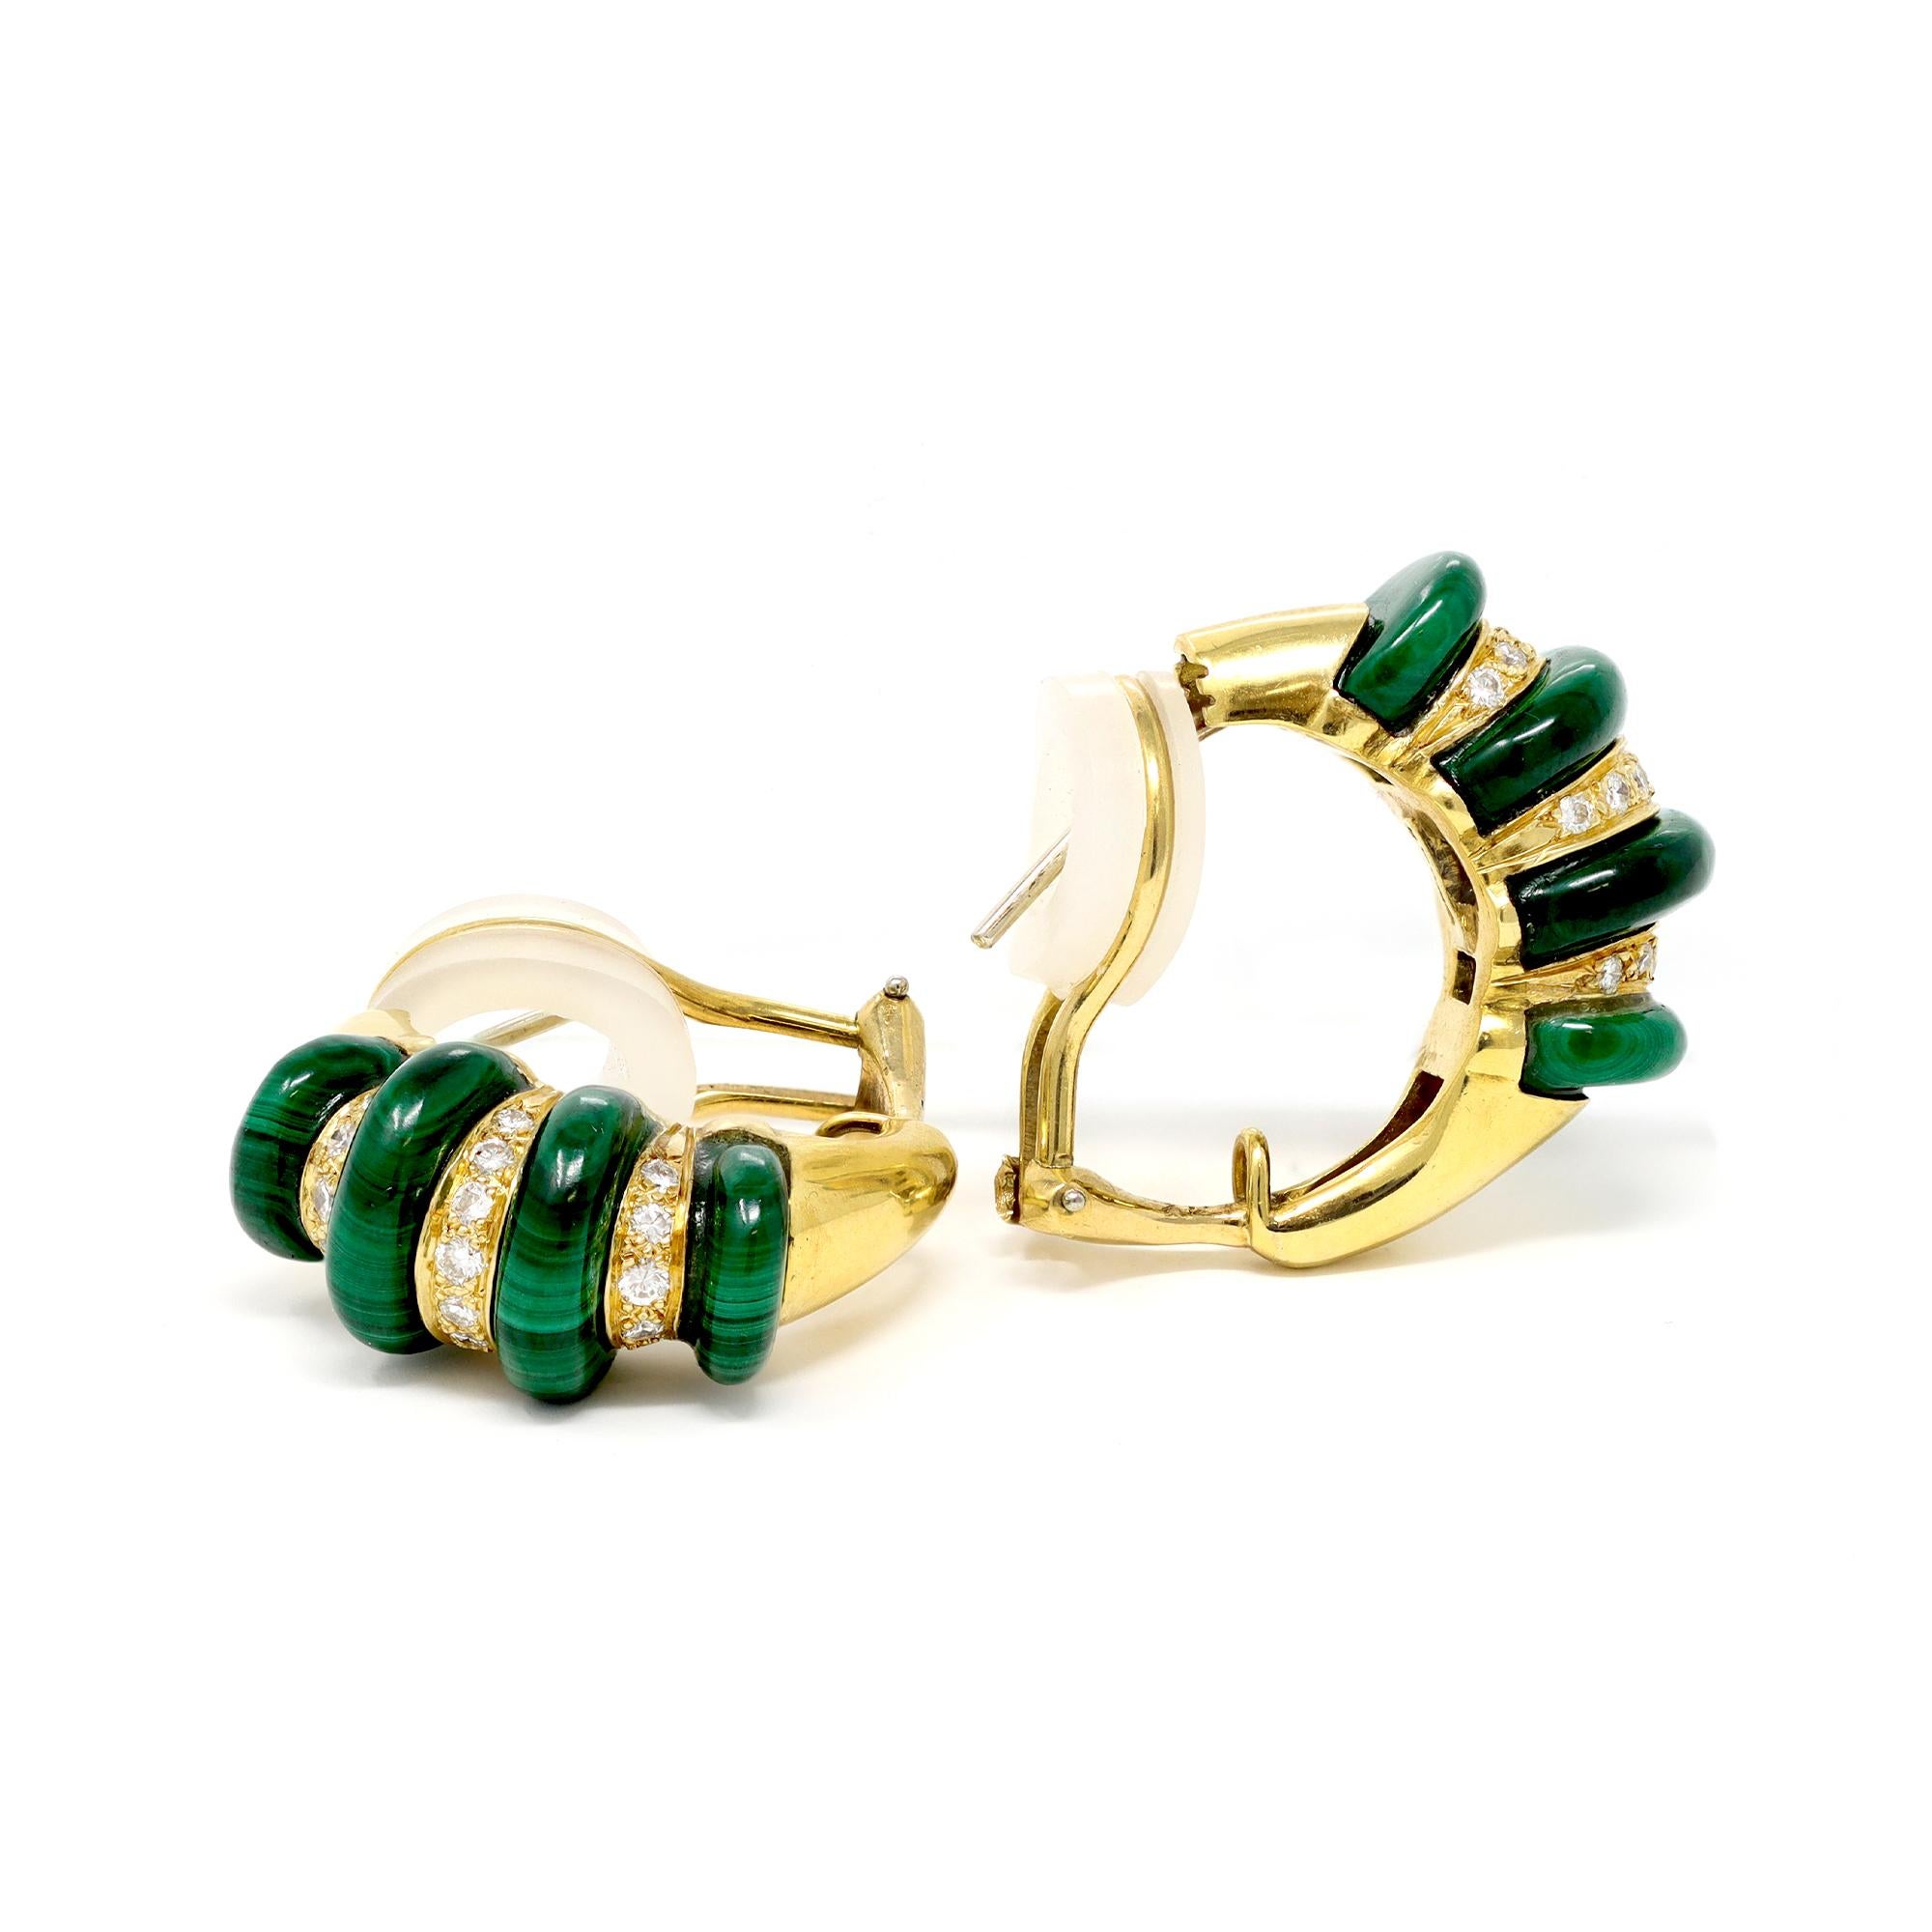 A pair of Modern Striped malachite and diamond hoop earrings circa 1970. Styled in 18 karat yellow gold these earrings are stamped CY. The estimated weight of the diamonds is 0.44 carats of GH color and VS-SI clarity. The gross weight is 15.9 grams.